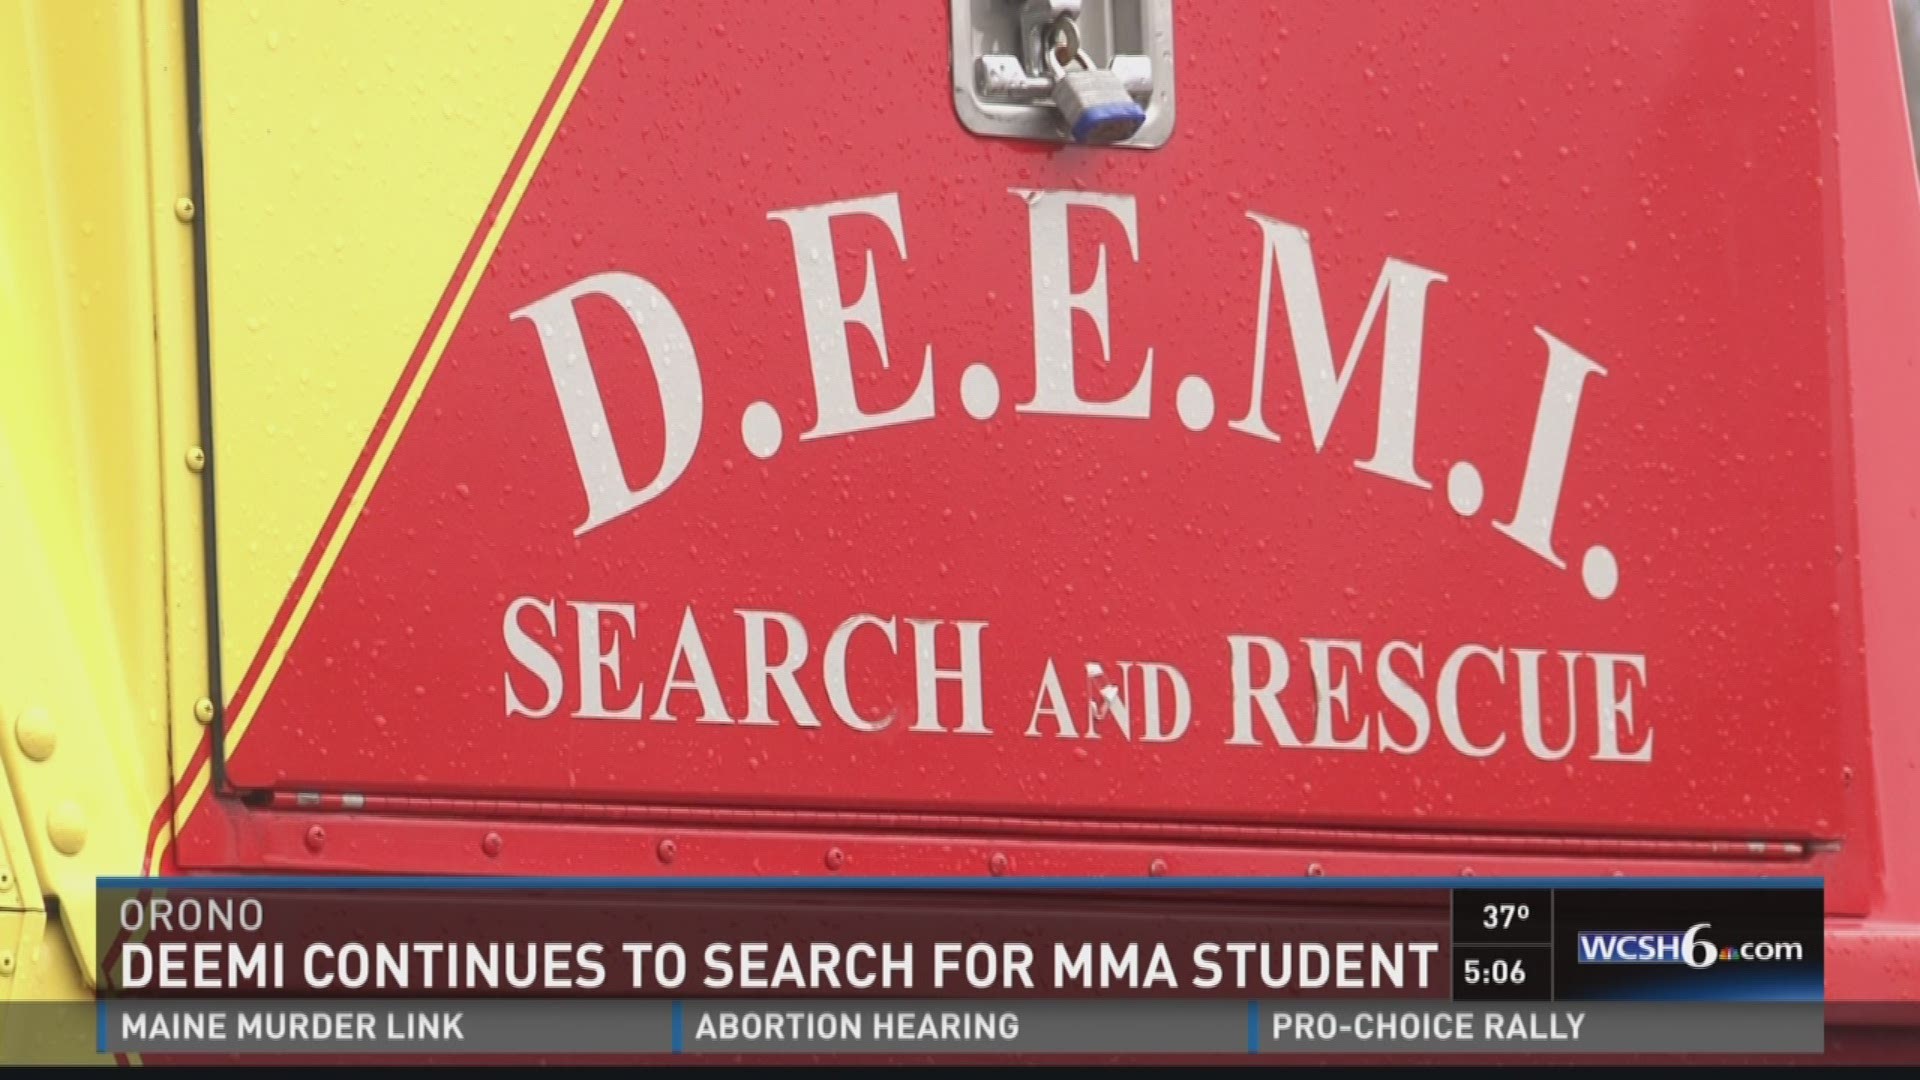 Search crews focus on body recovery as MMA student is still missing.